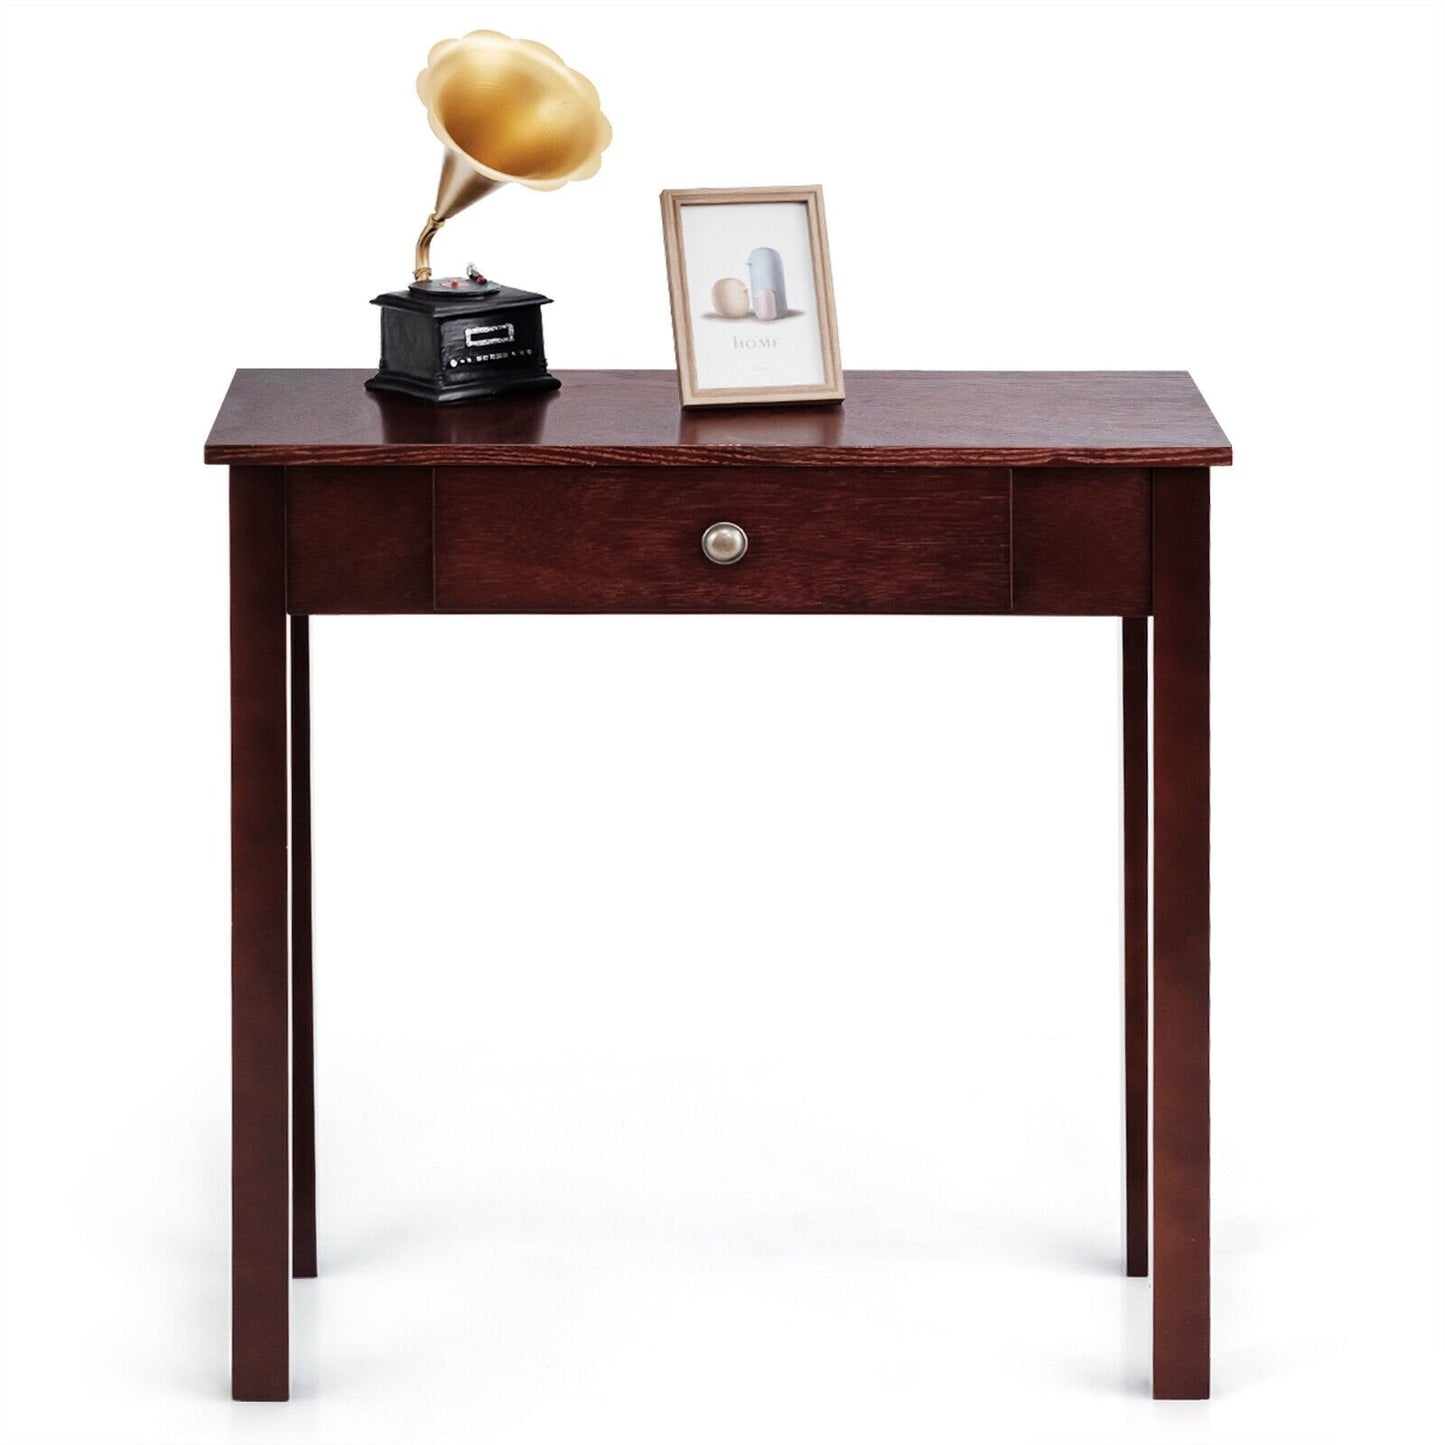 Small Space Console Table with Drawer for Living Room Bathroom Hallway, Dark Brown - Gallery Canada